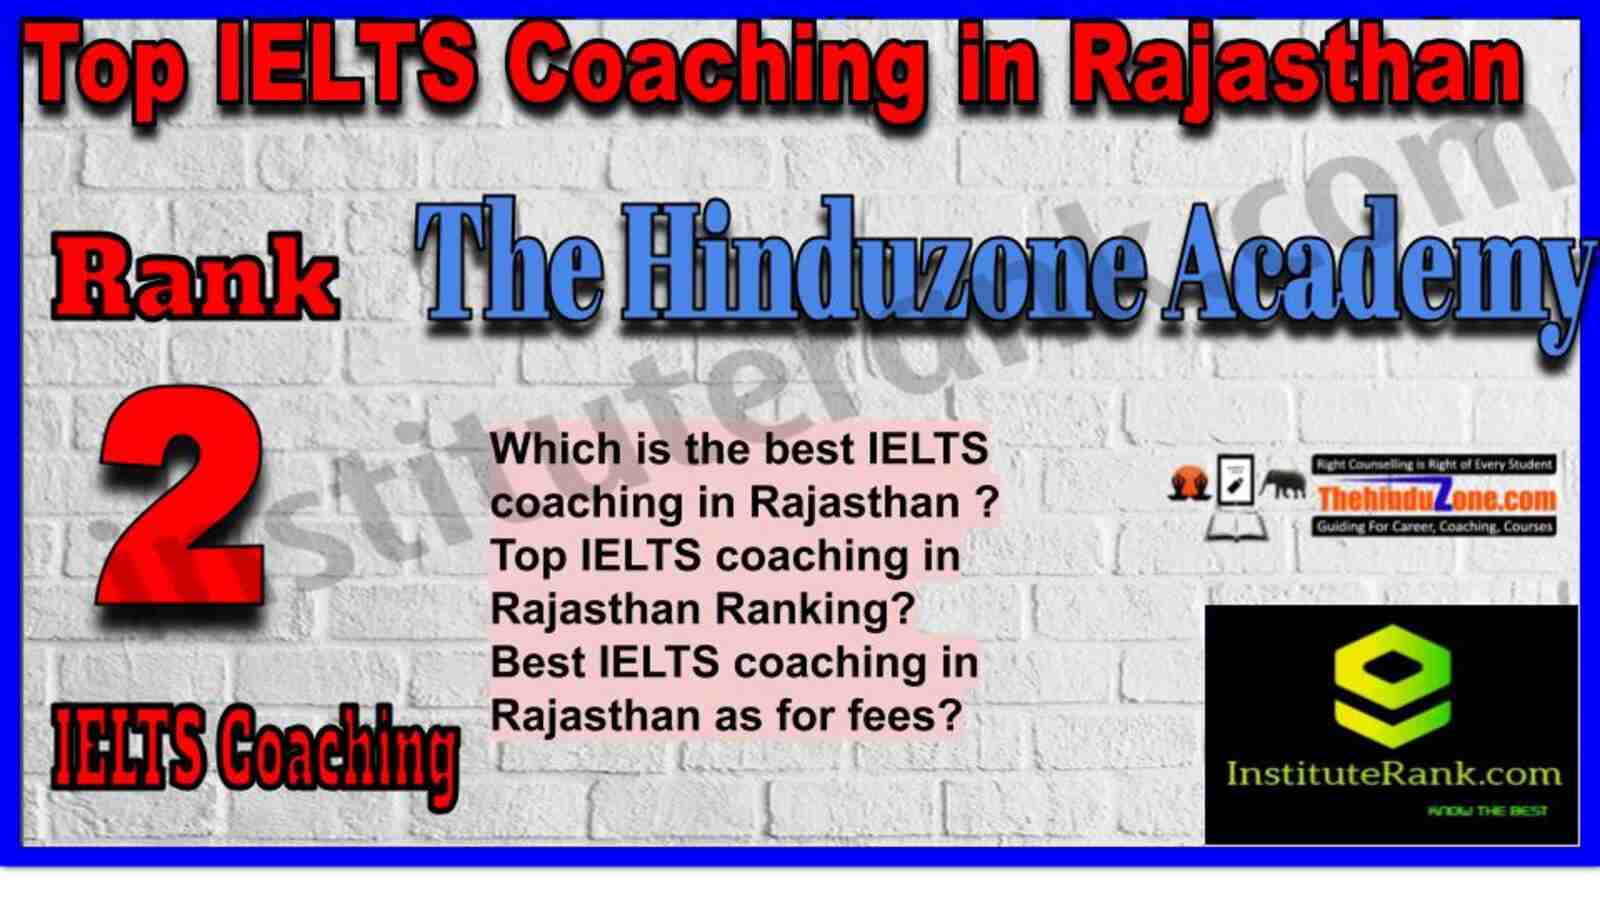 Rank 2. The Hinduzone Academy | Best IELTS Coaching in Rajasthan